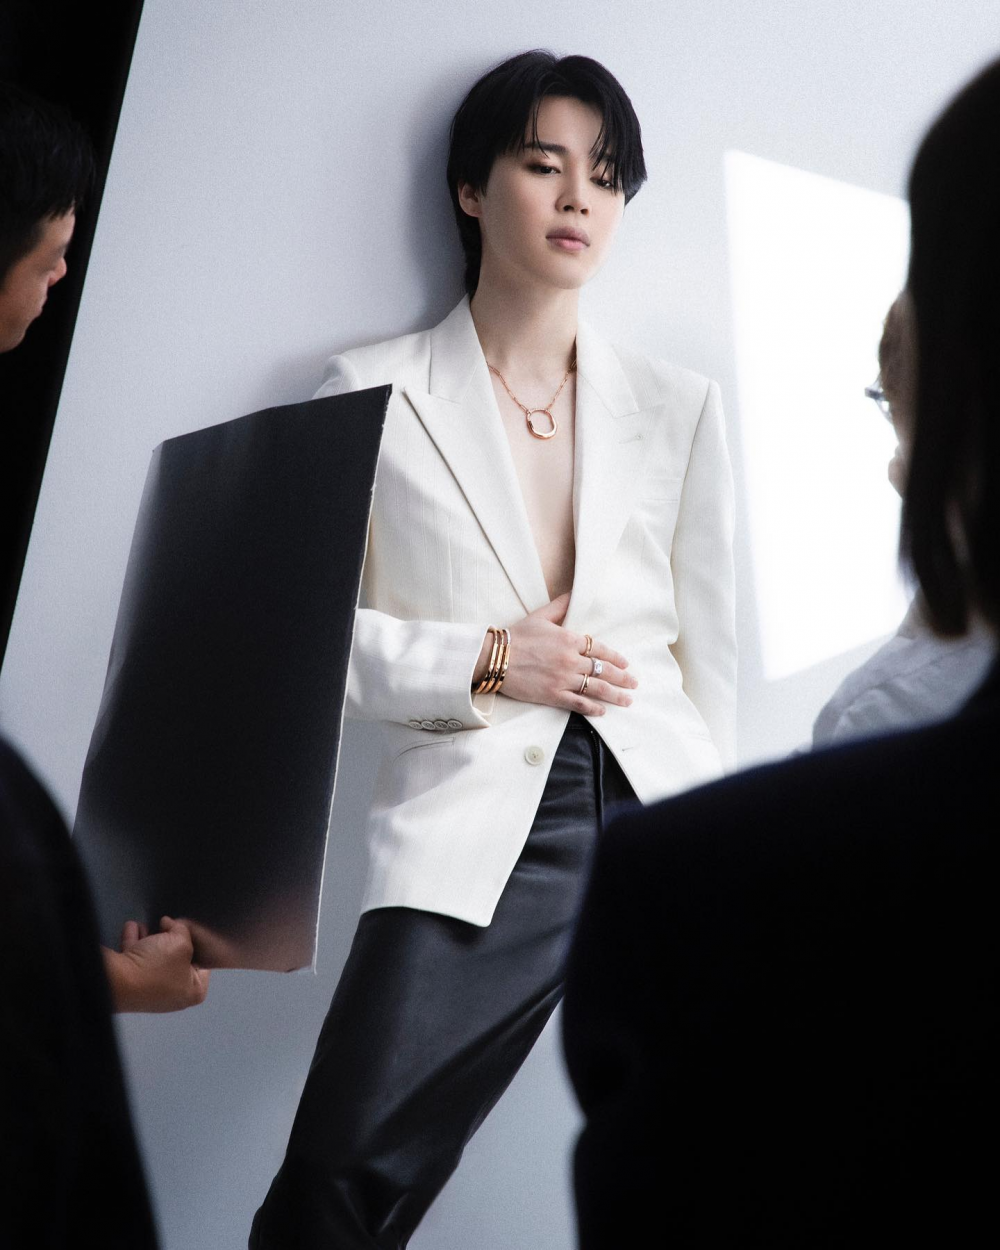 BTS Jimin wearing a white suit and Tiffany & Co jewelry.